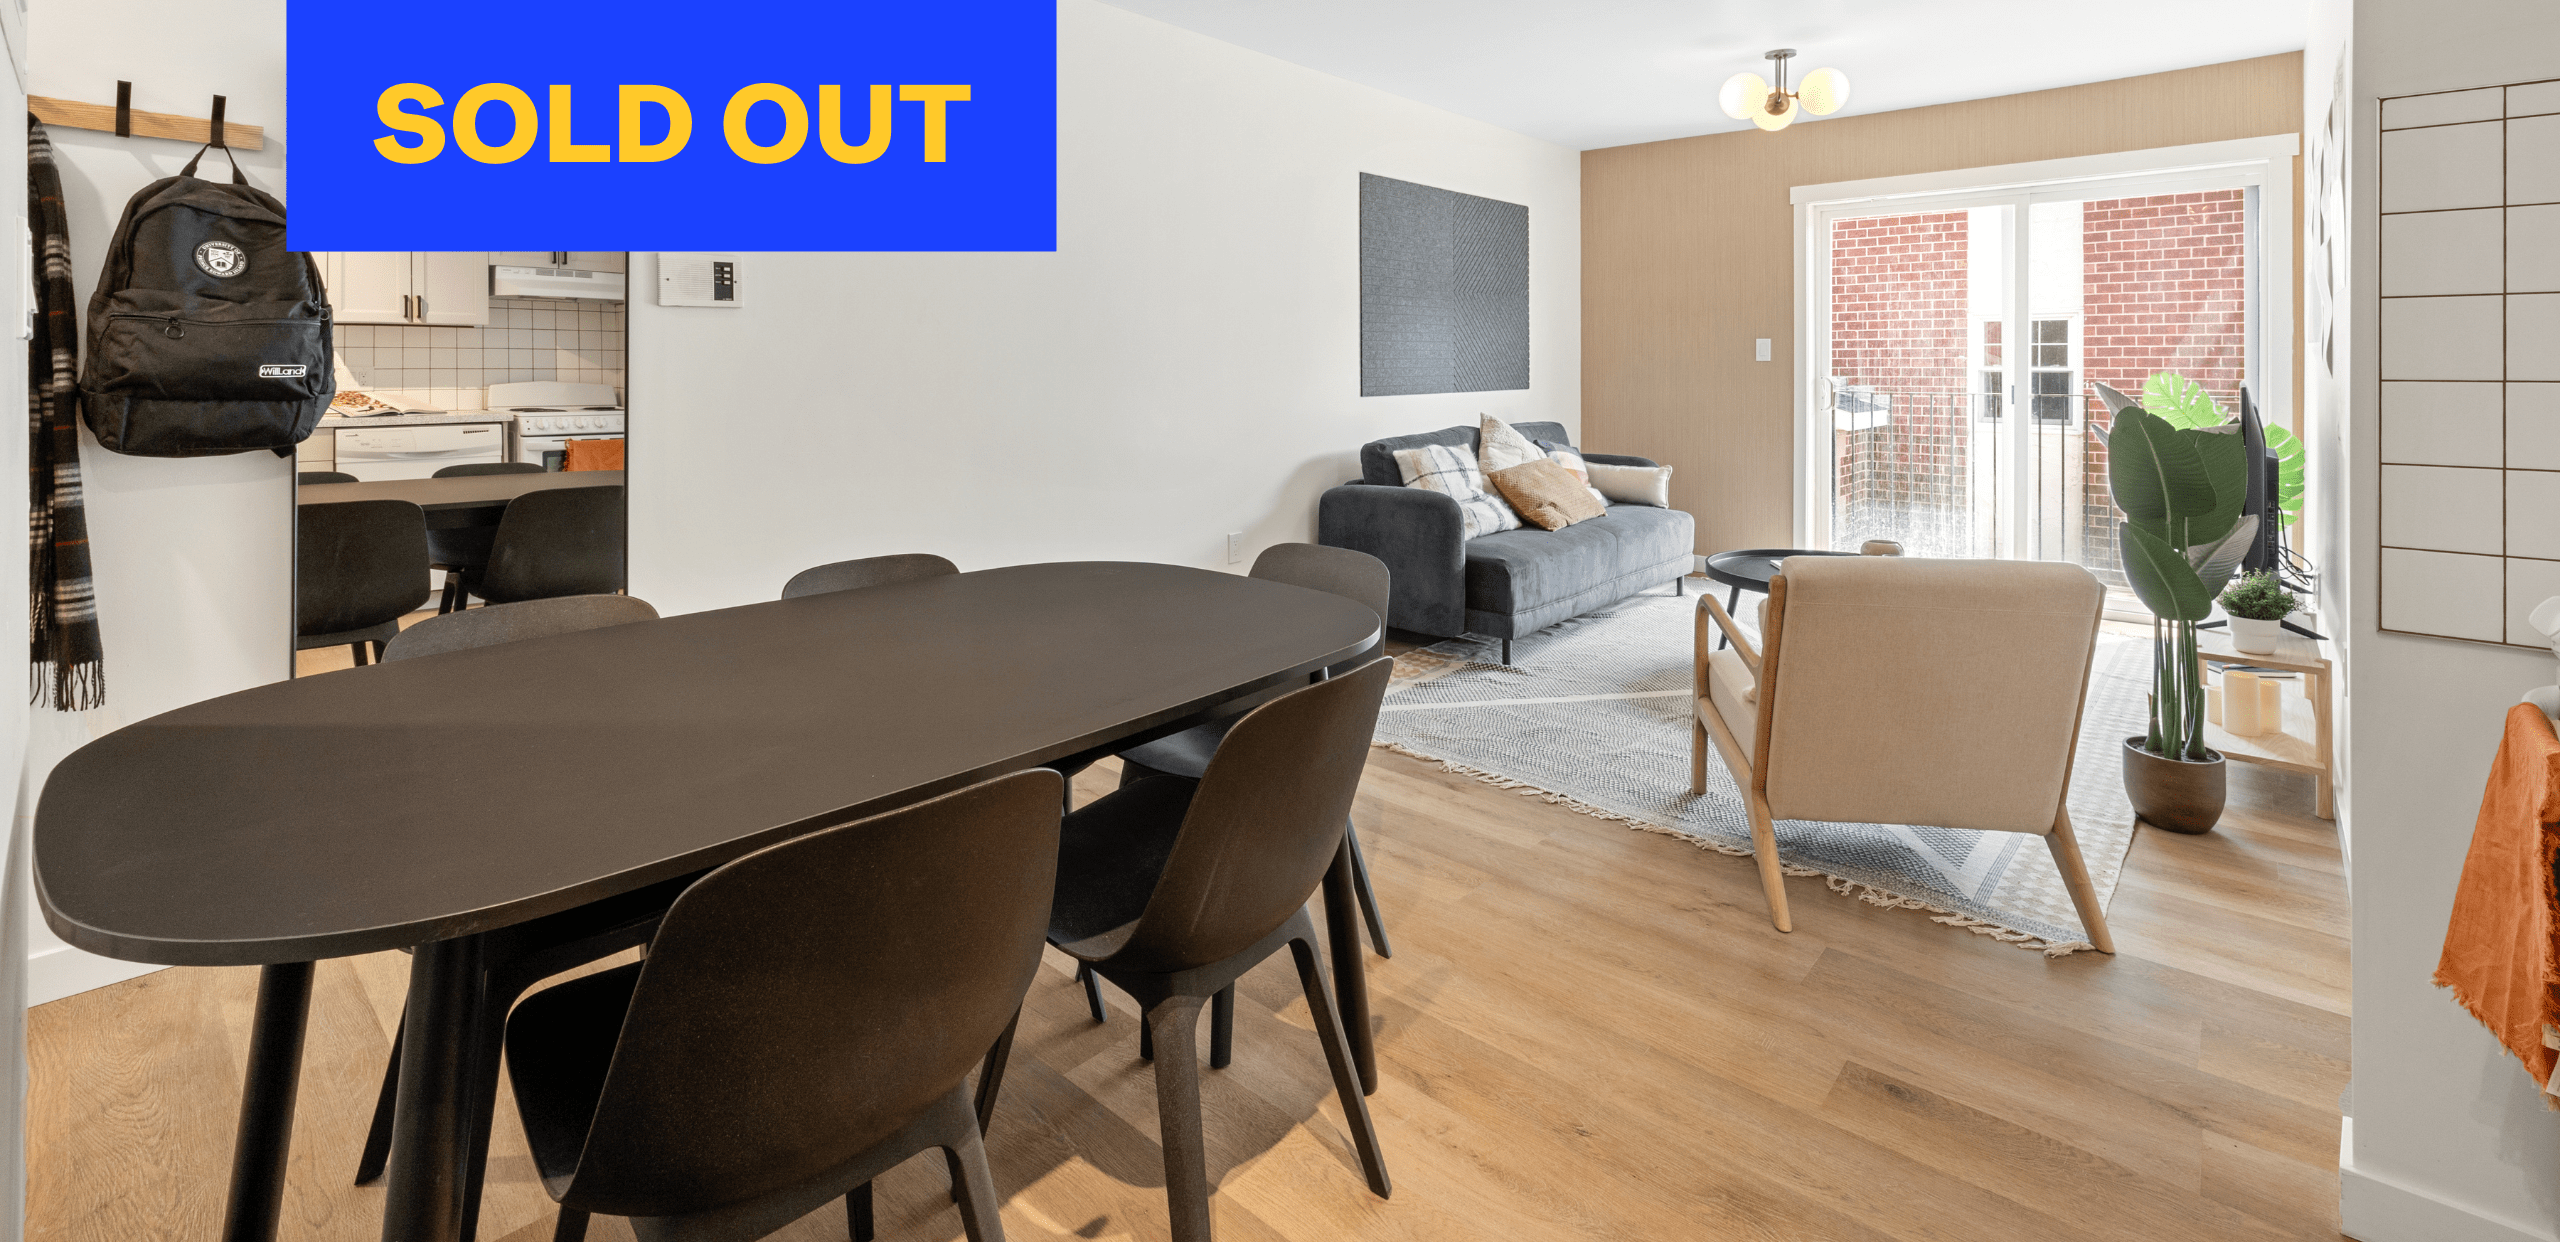 Brown's Court: 1 bedroom sold out